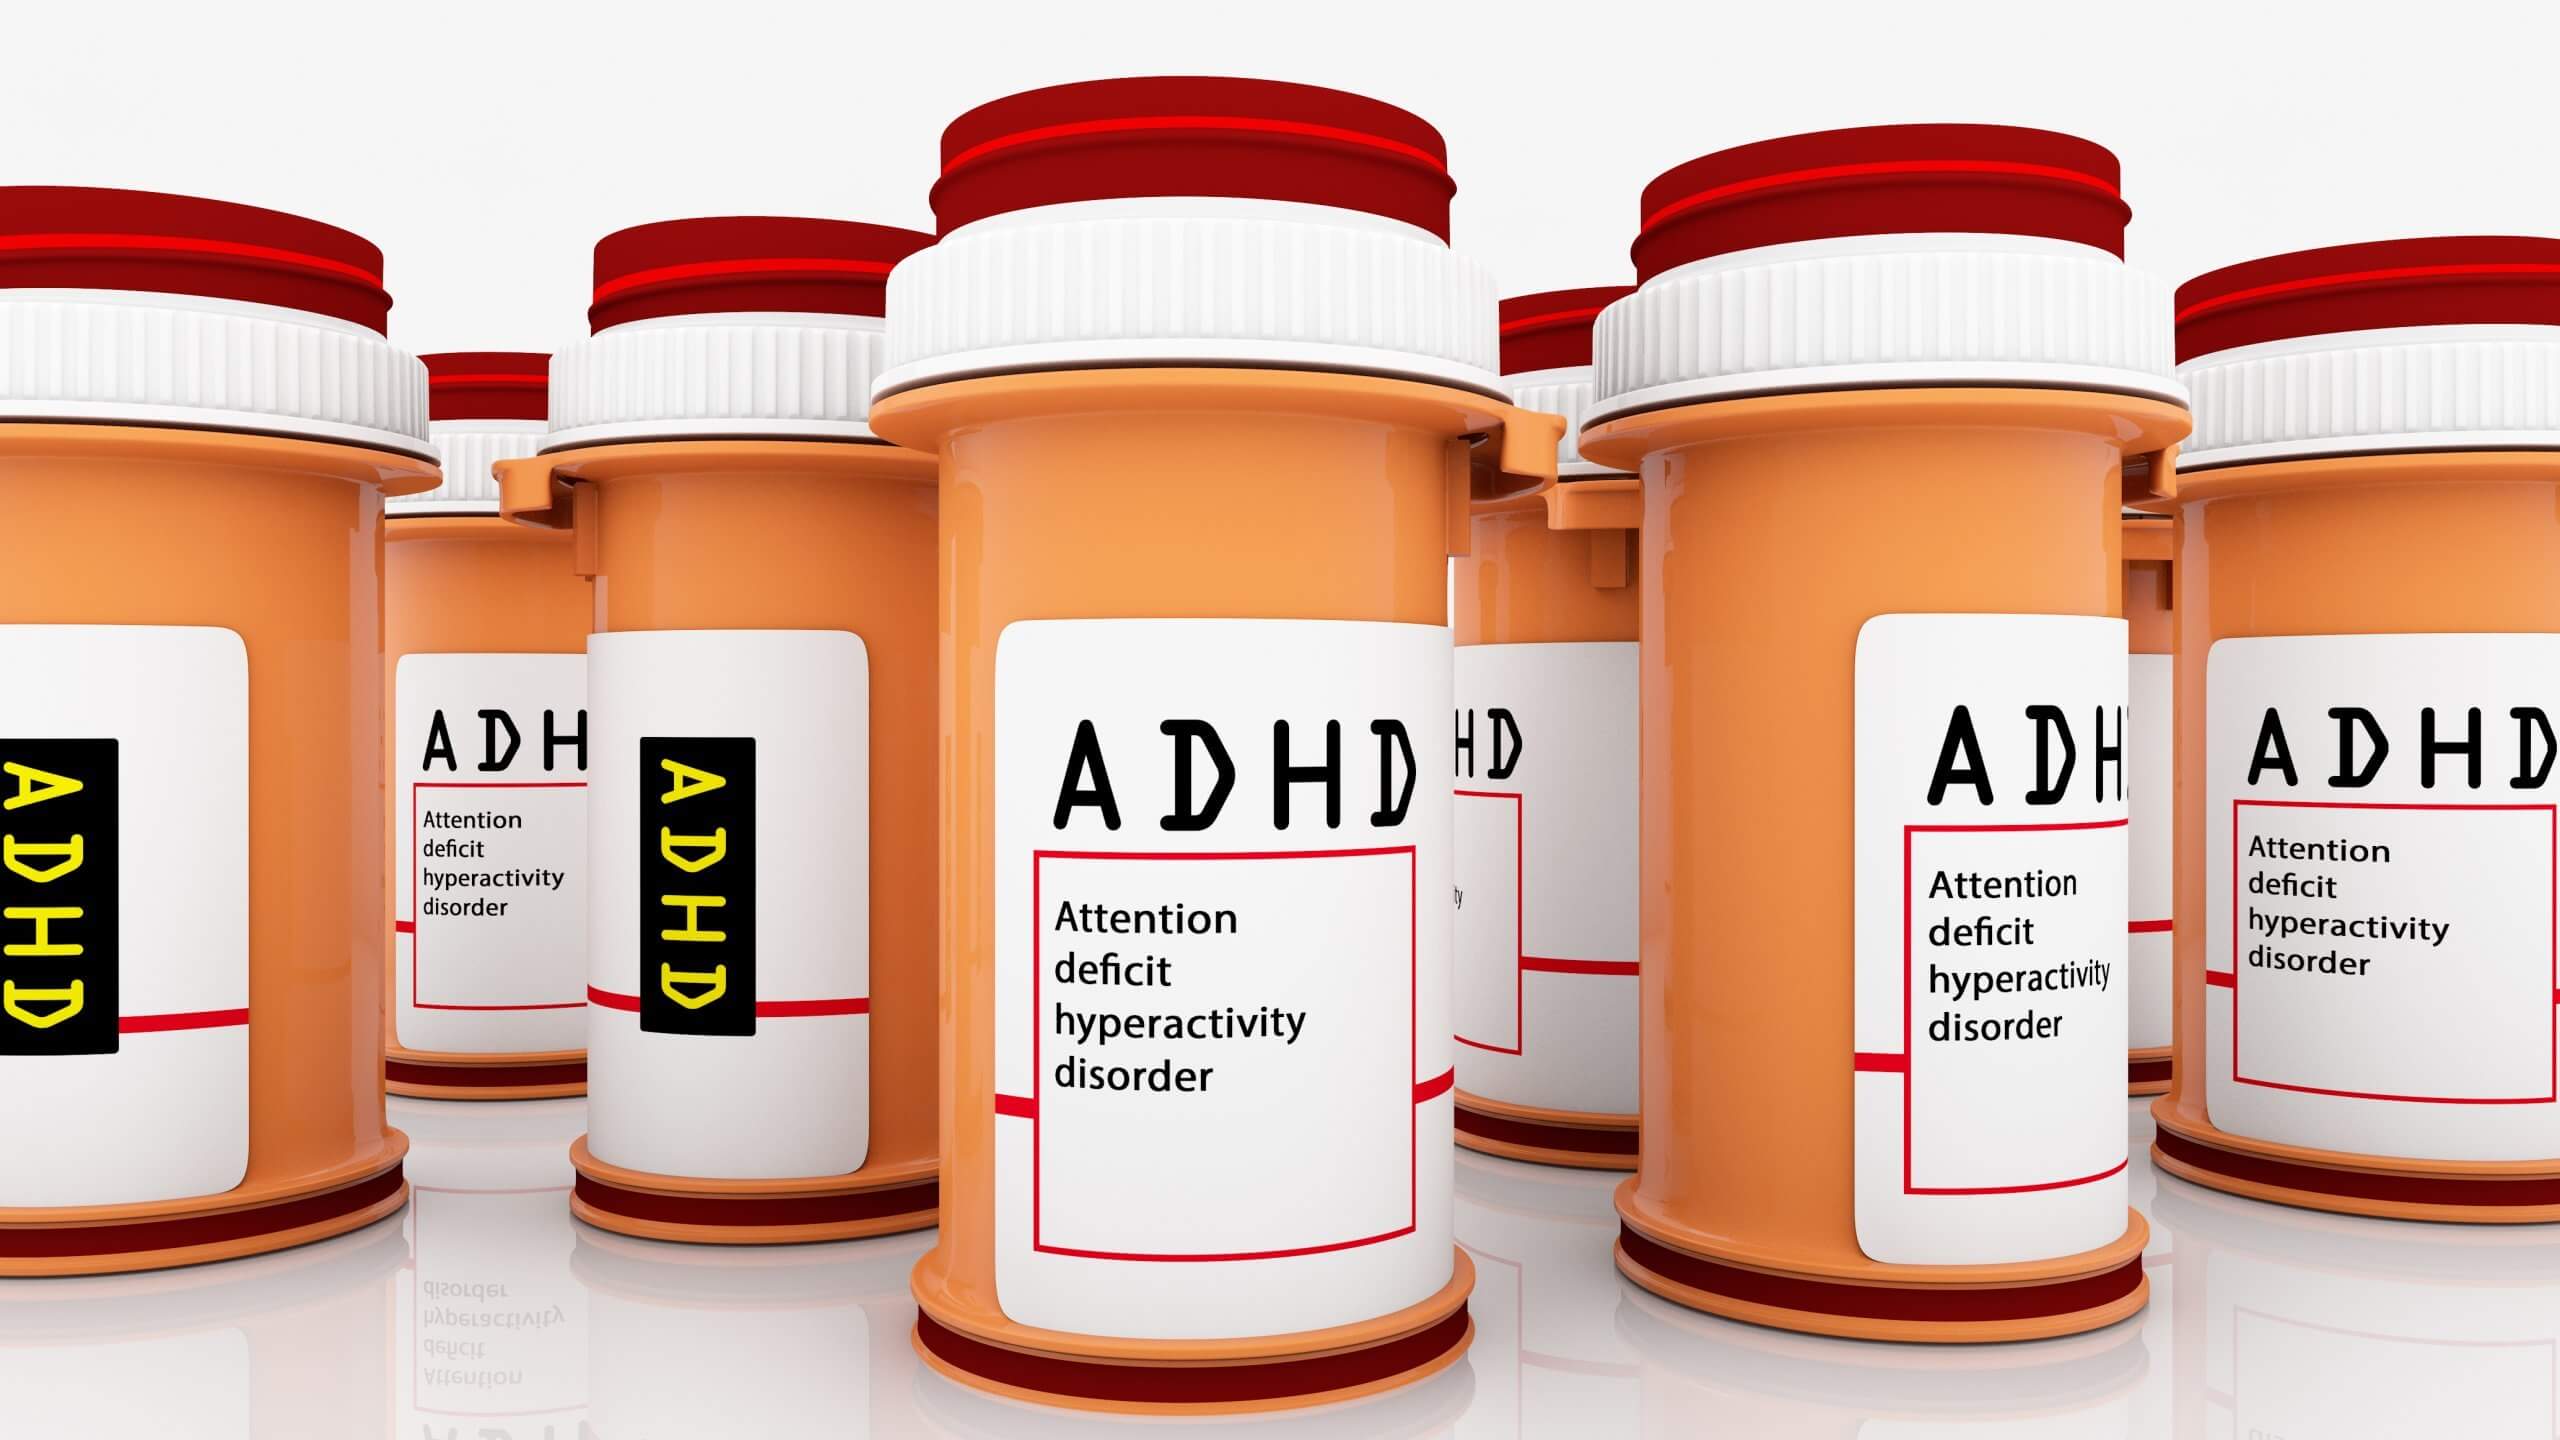 Featured image for “How Can I Tell if My ADHD Medication is Working?”